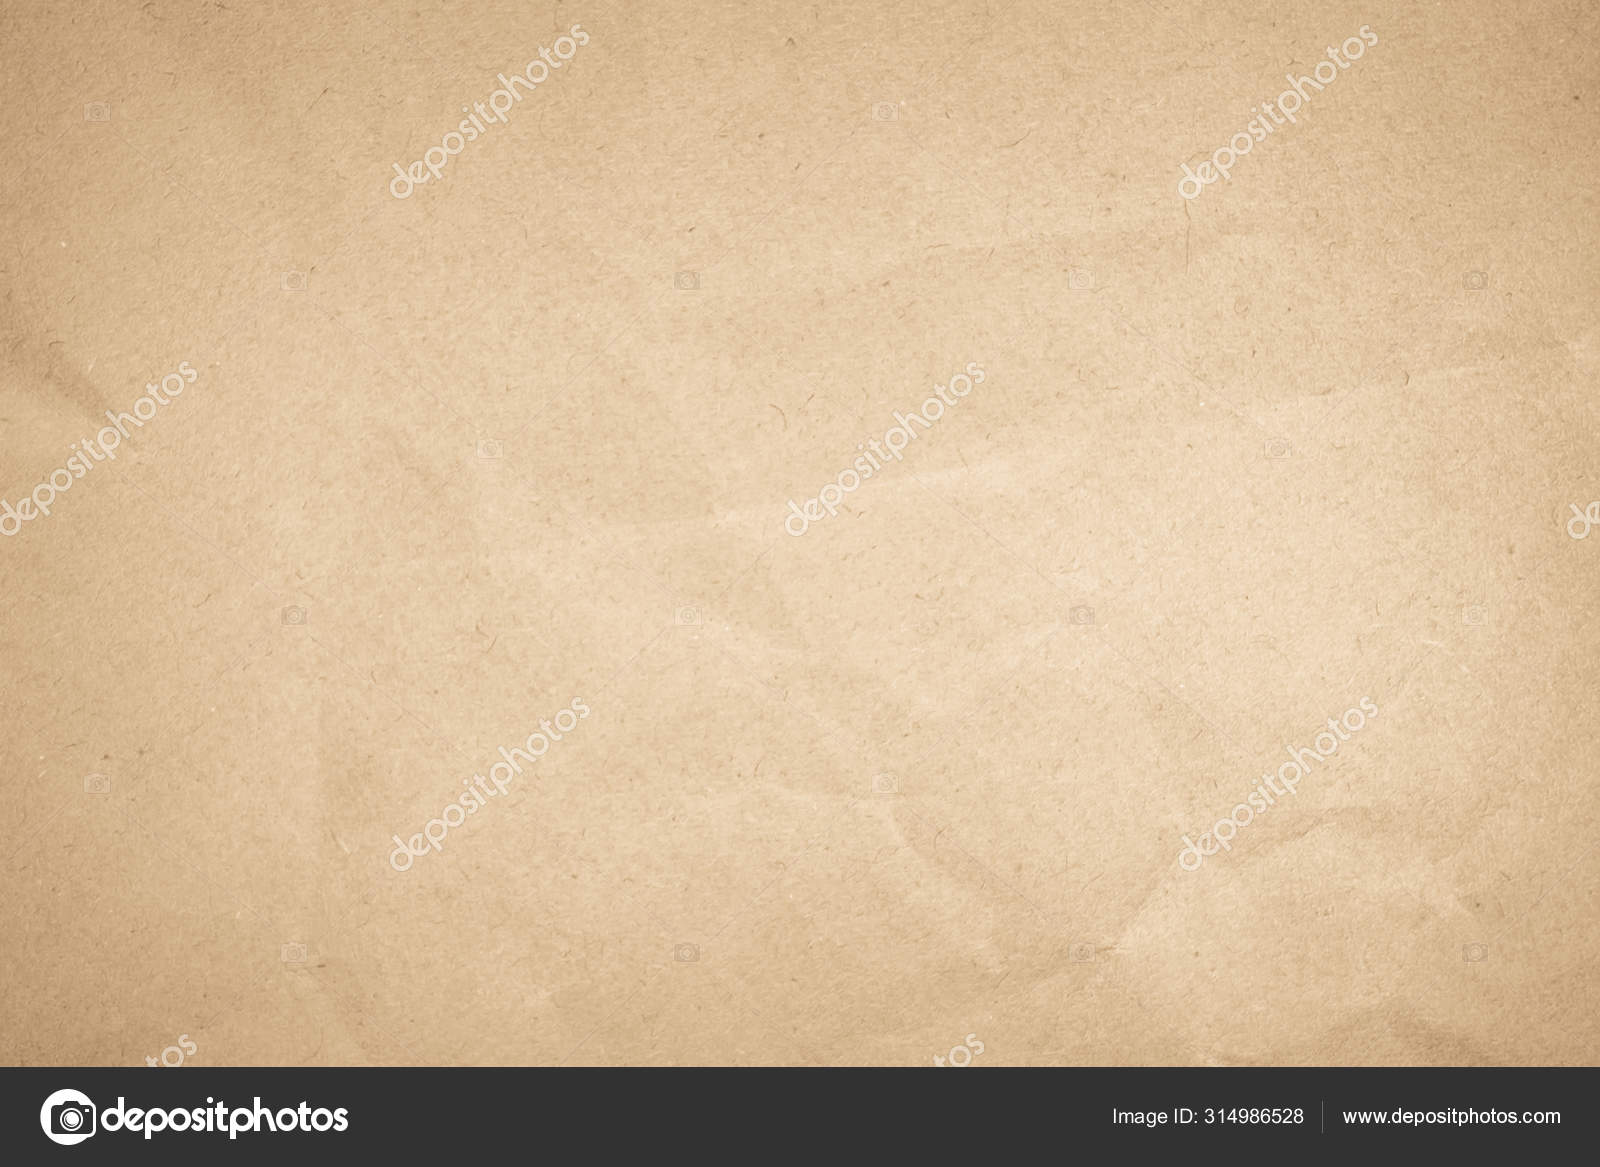 Brown recycled paper crumpled texture background. Cream Old vintage page or  grunge vignette parchment old blank newspaper. Pattern empty rough  cardboard creased grunge surface backdrop with space. Stock Photo